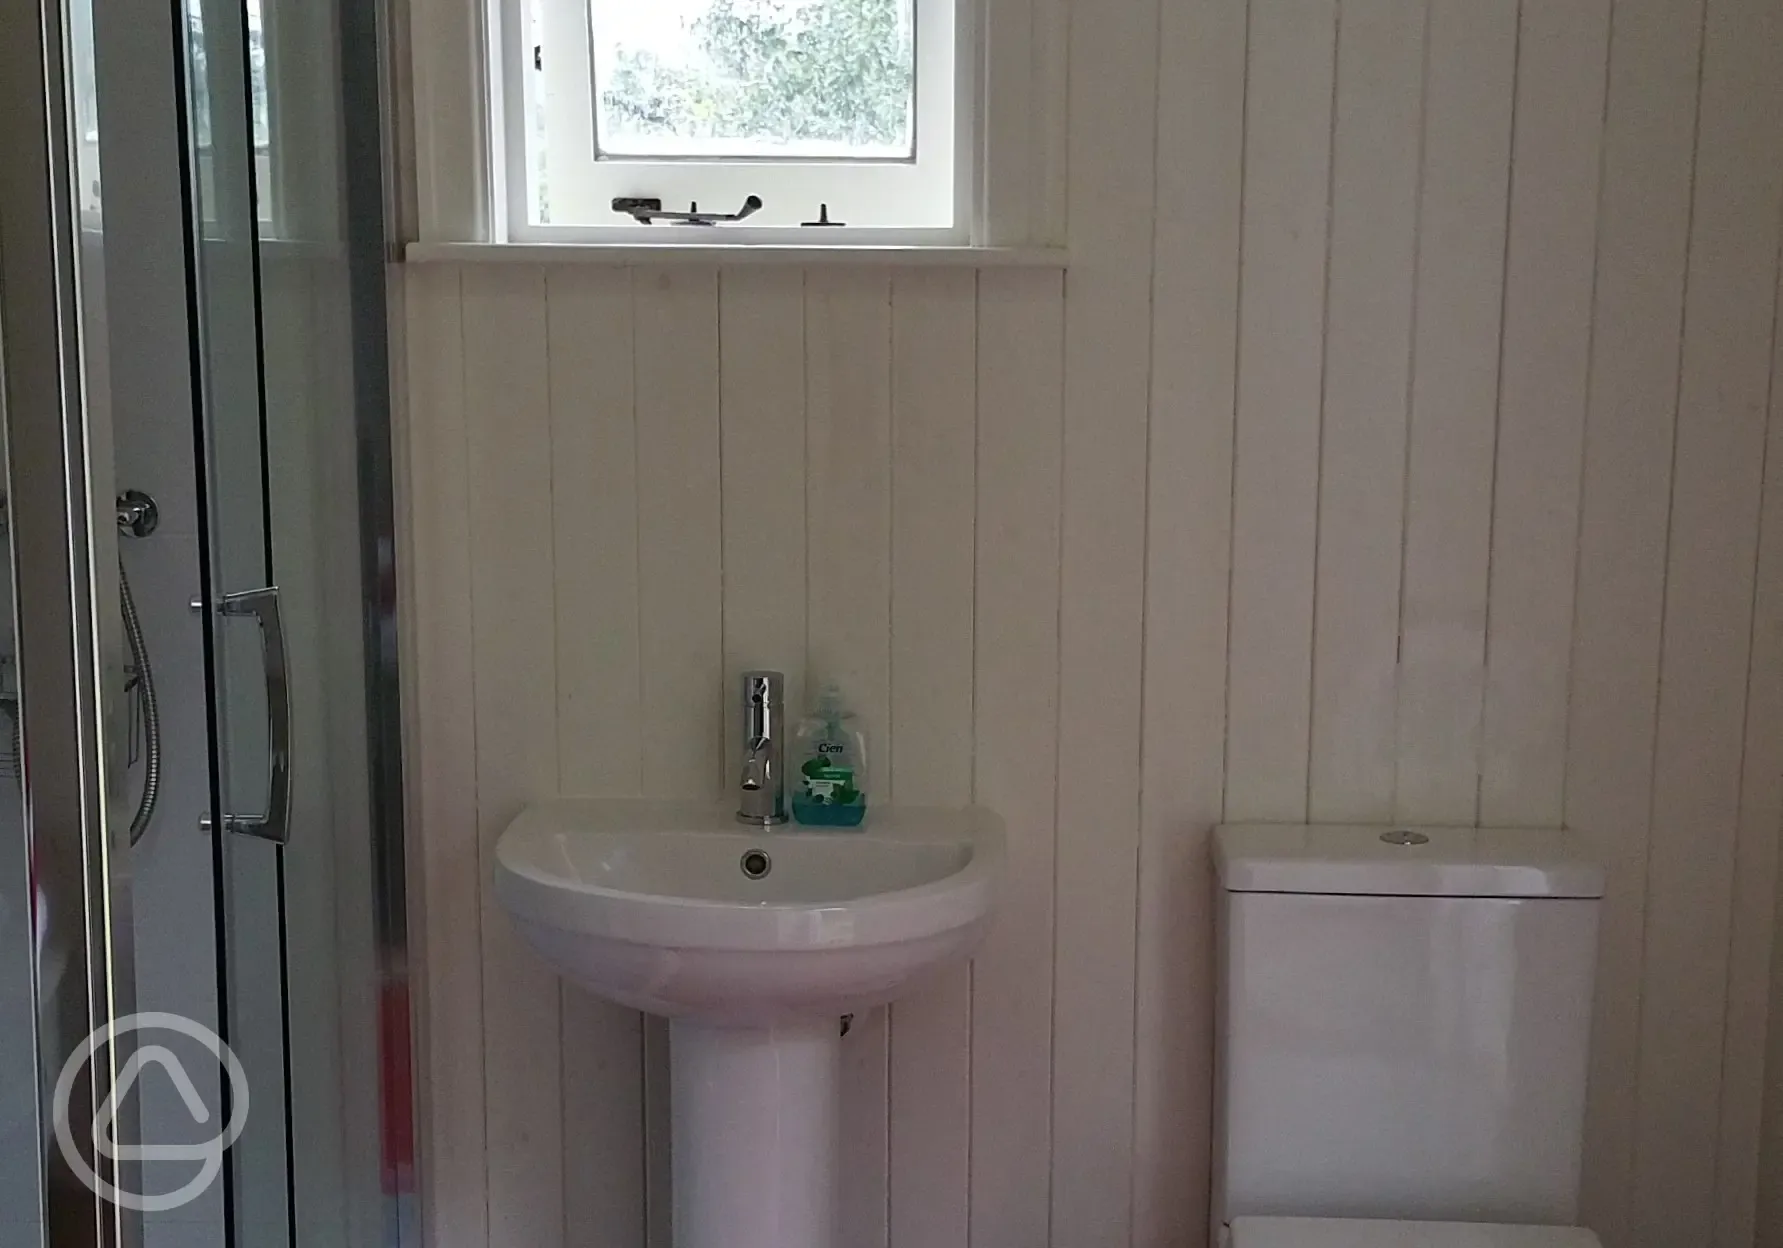 Hut shower room with toilet and basin